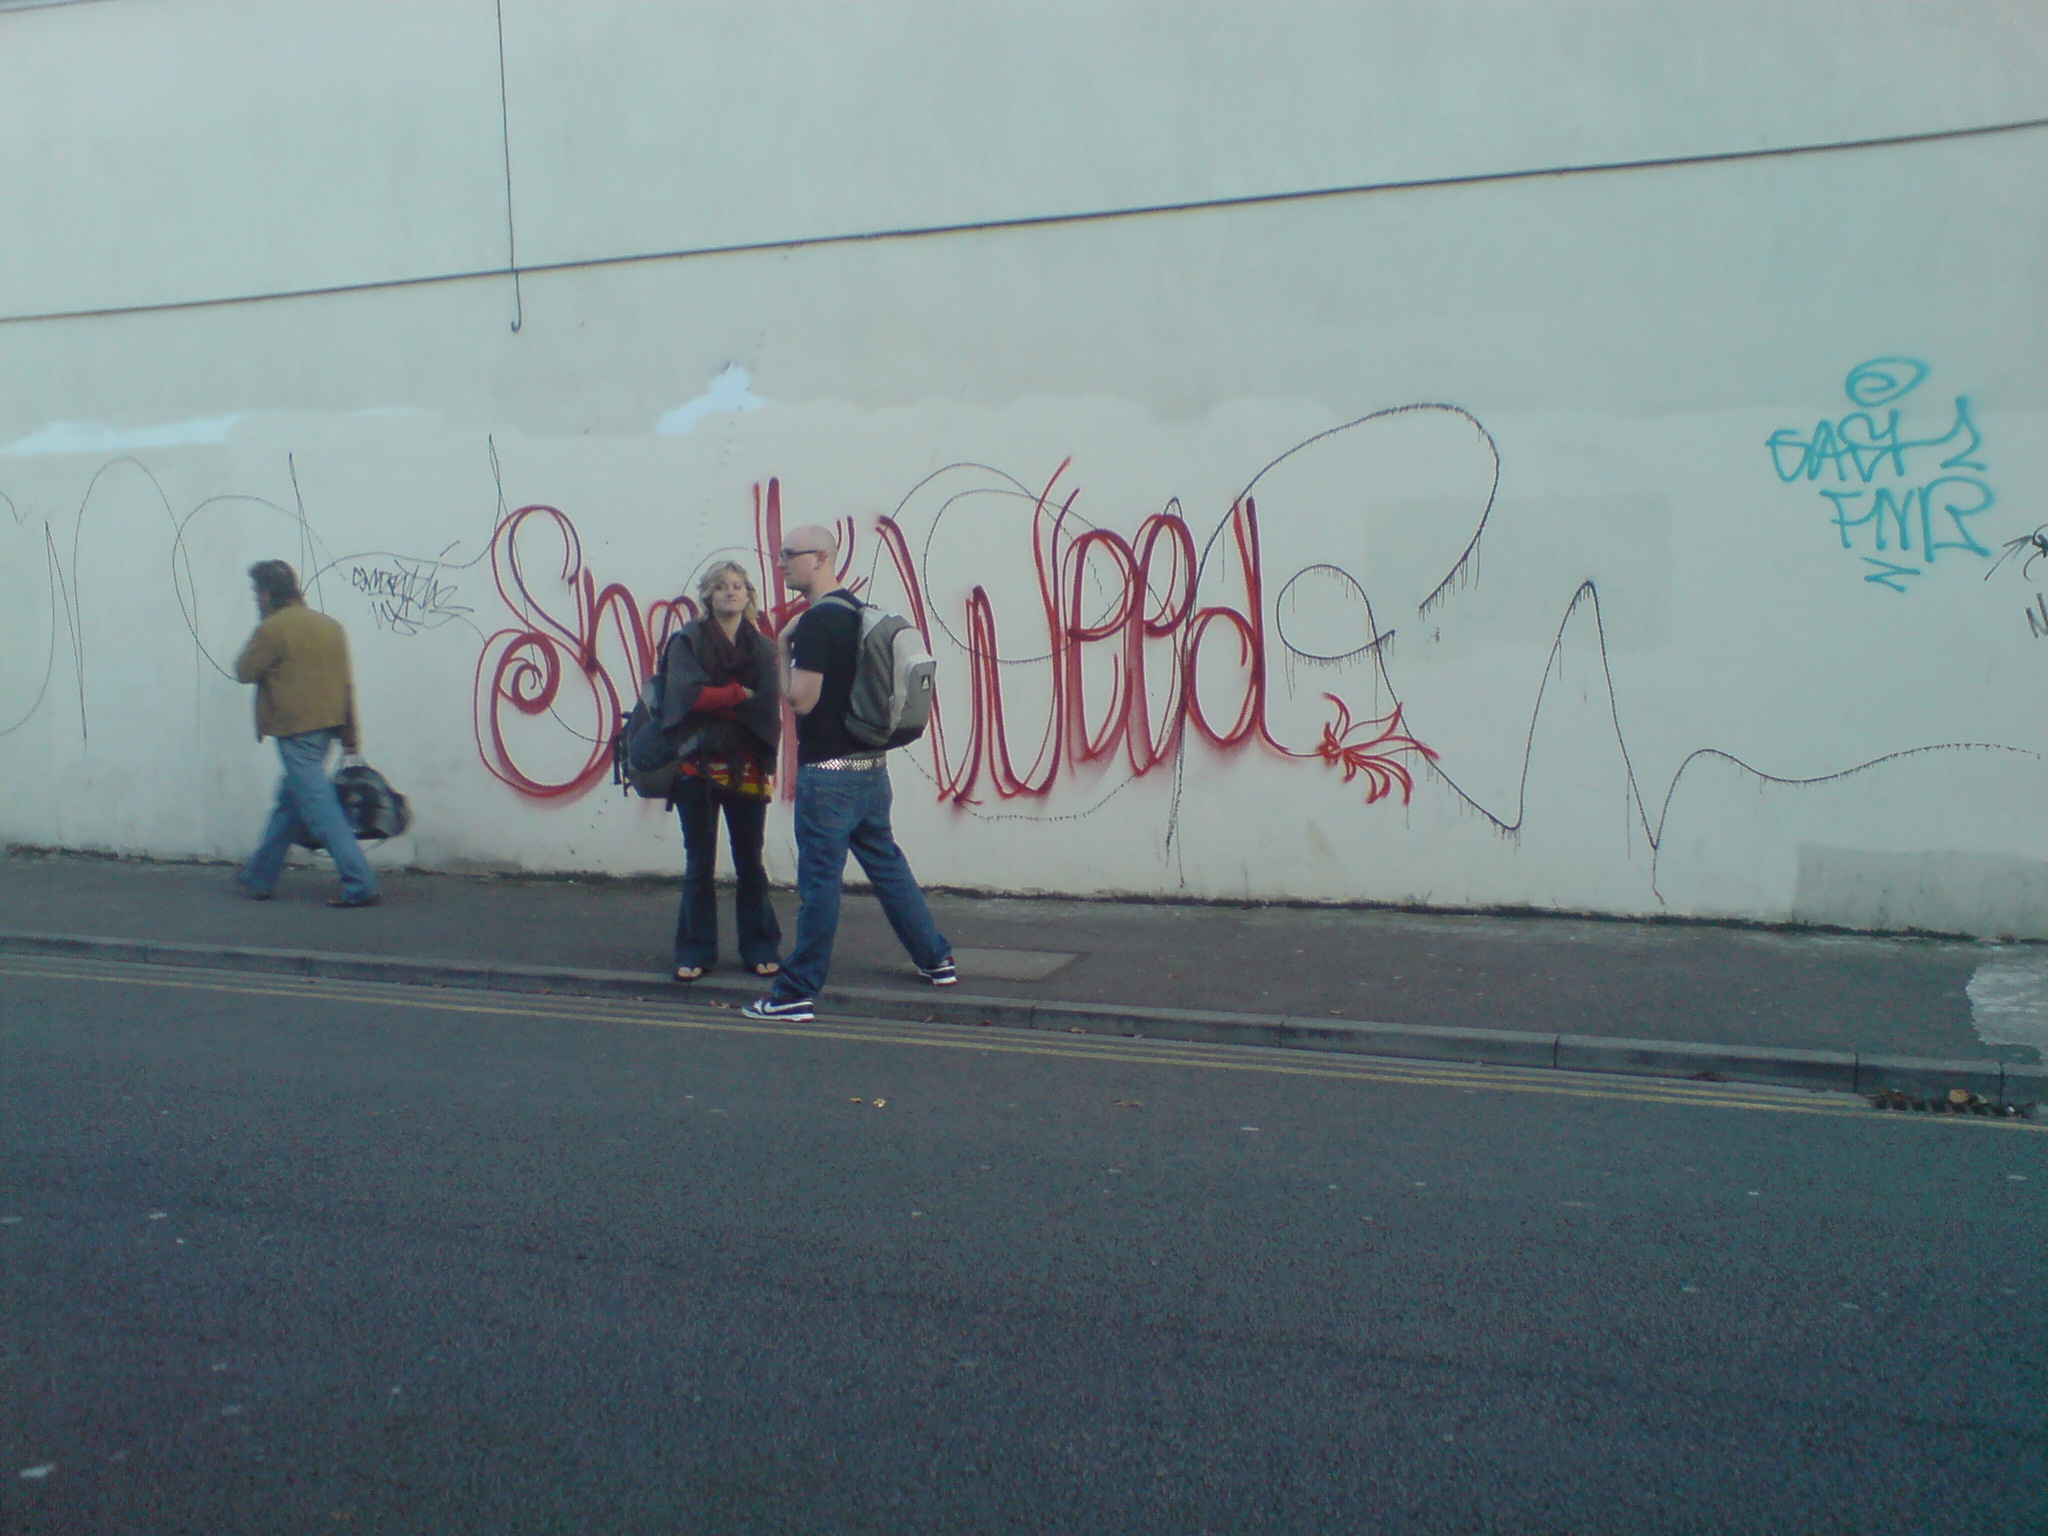 people are walking by a graffiti covered wall